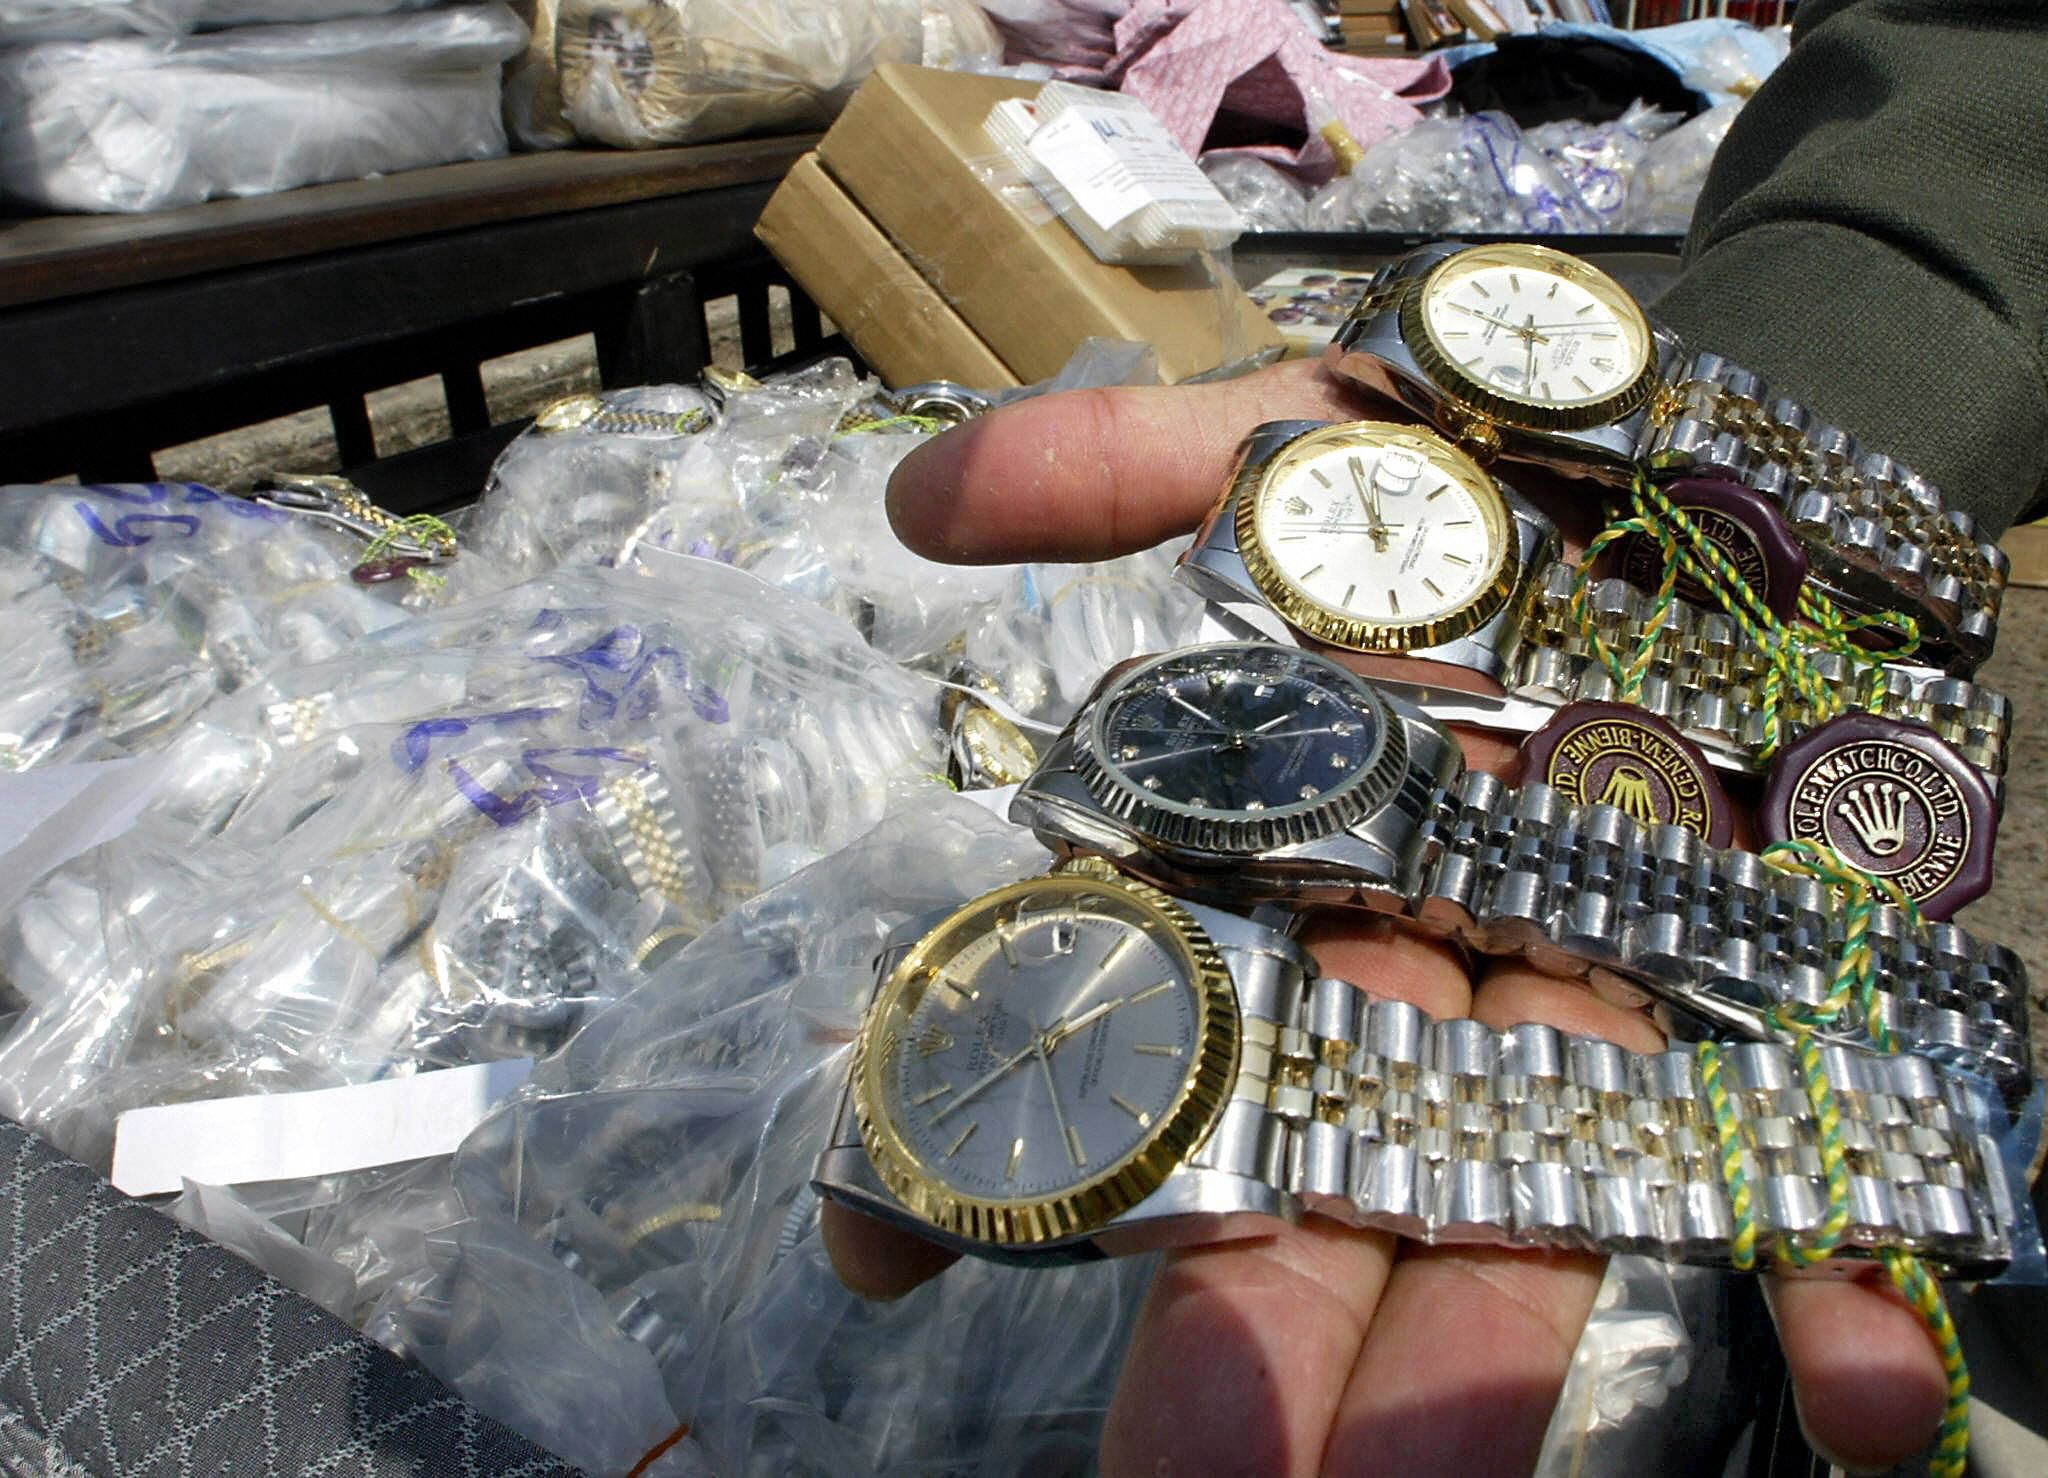 The High Price of Counterfeit Goods